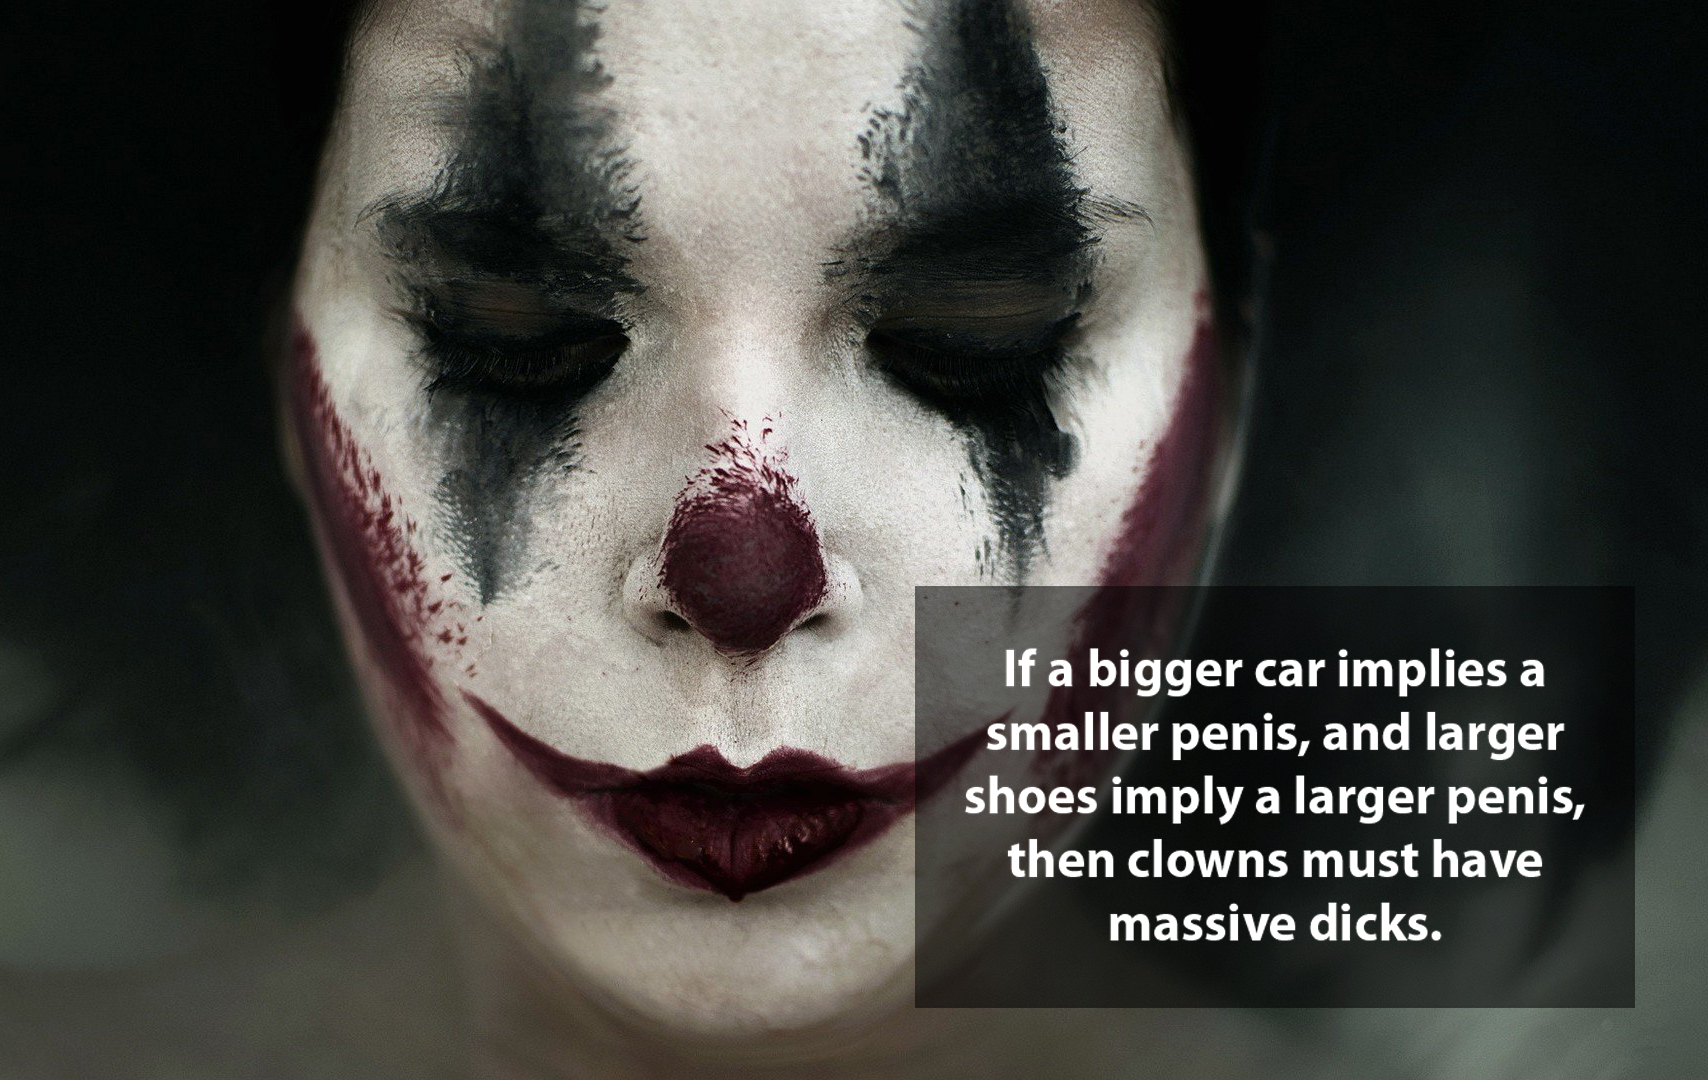 shower thought vintage scary clown makeup - If a bigger car implies a smaller penis, and larger shoes imply a larger penis, then clowns must have massive dicks.